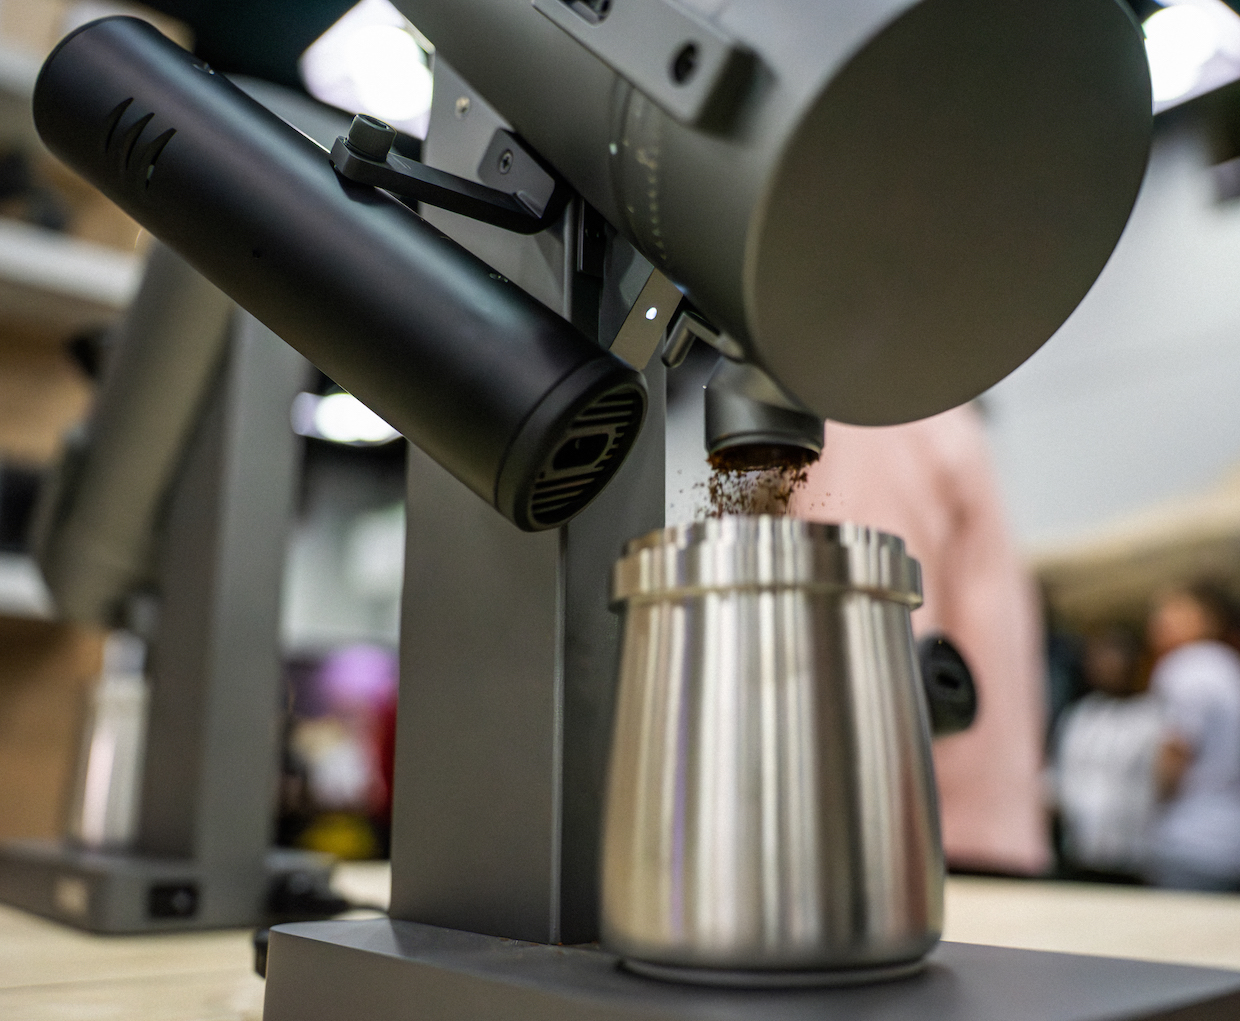 acaia ion beam attached to Orbit grinder